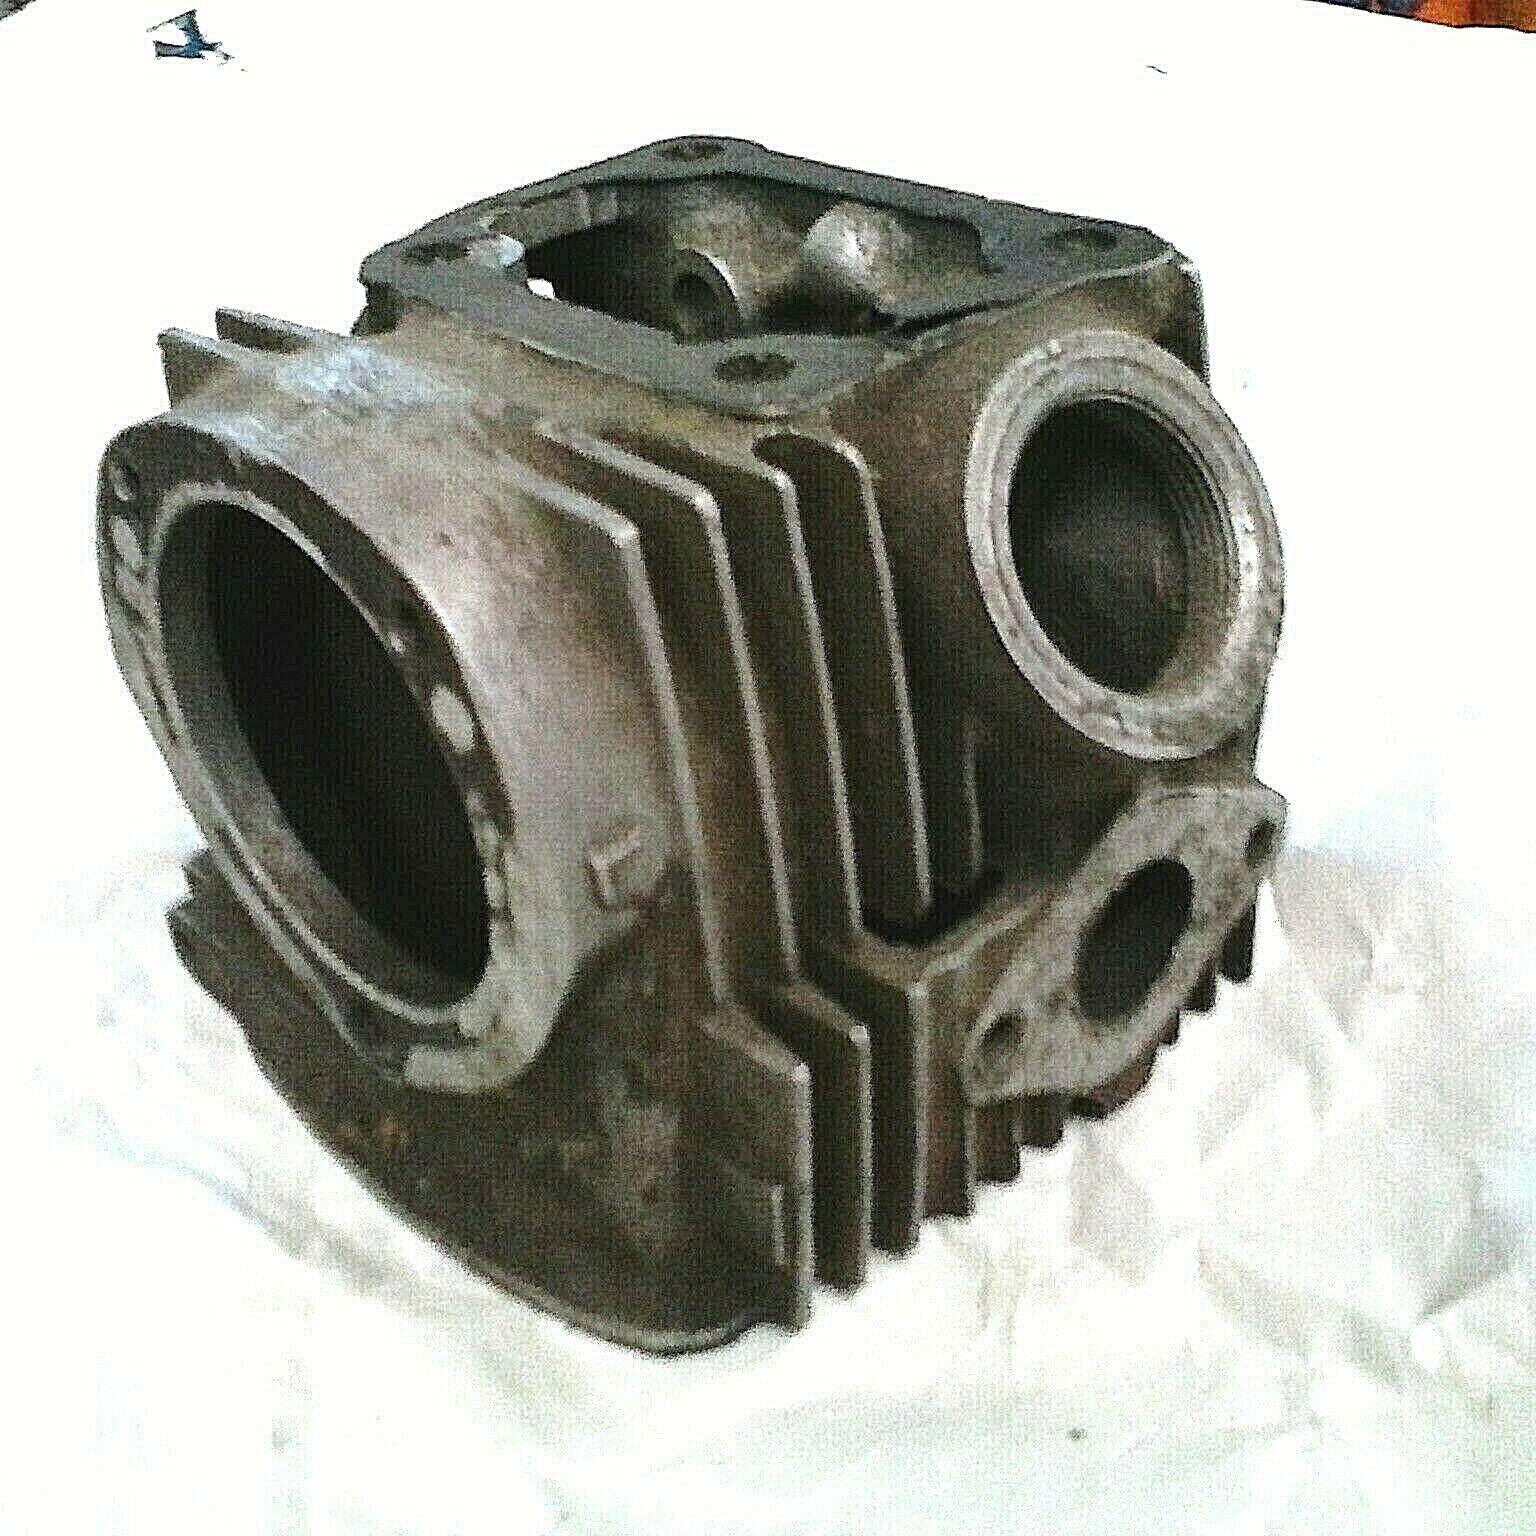 Honda Ct90 Ct70 Xr80 Xr100 Crf80 Crf100 Stage Two Cylinder Head Service